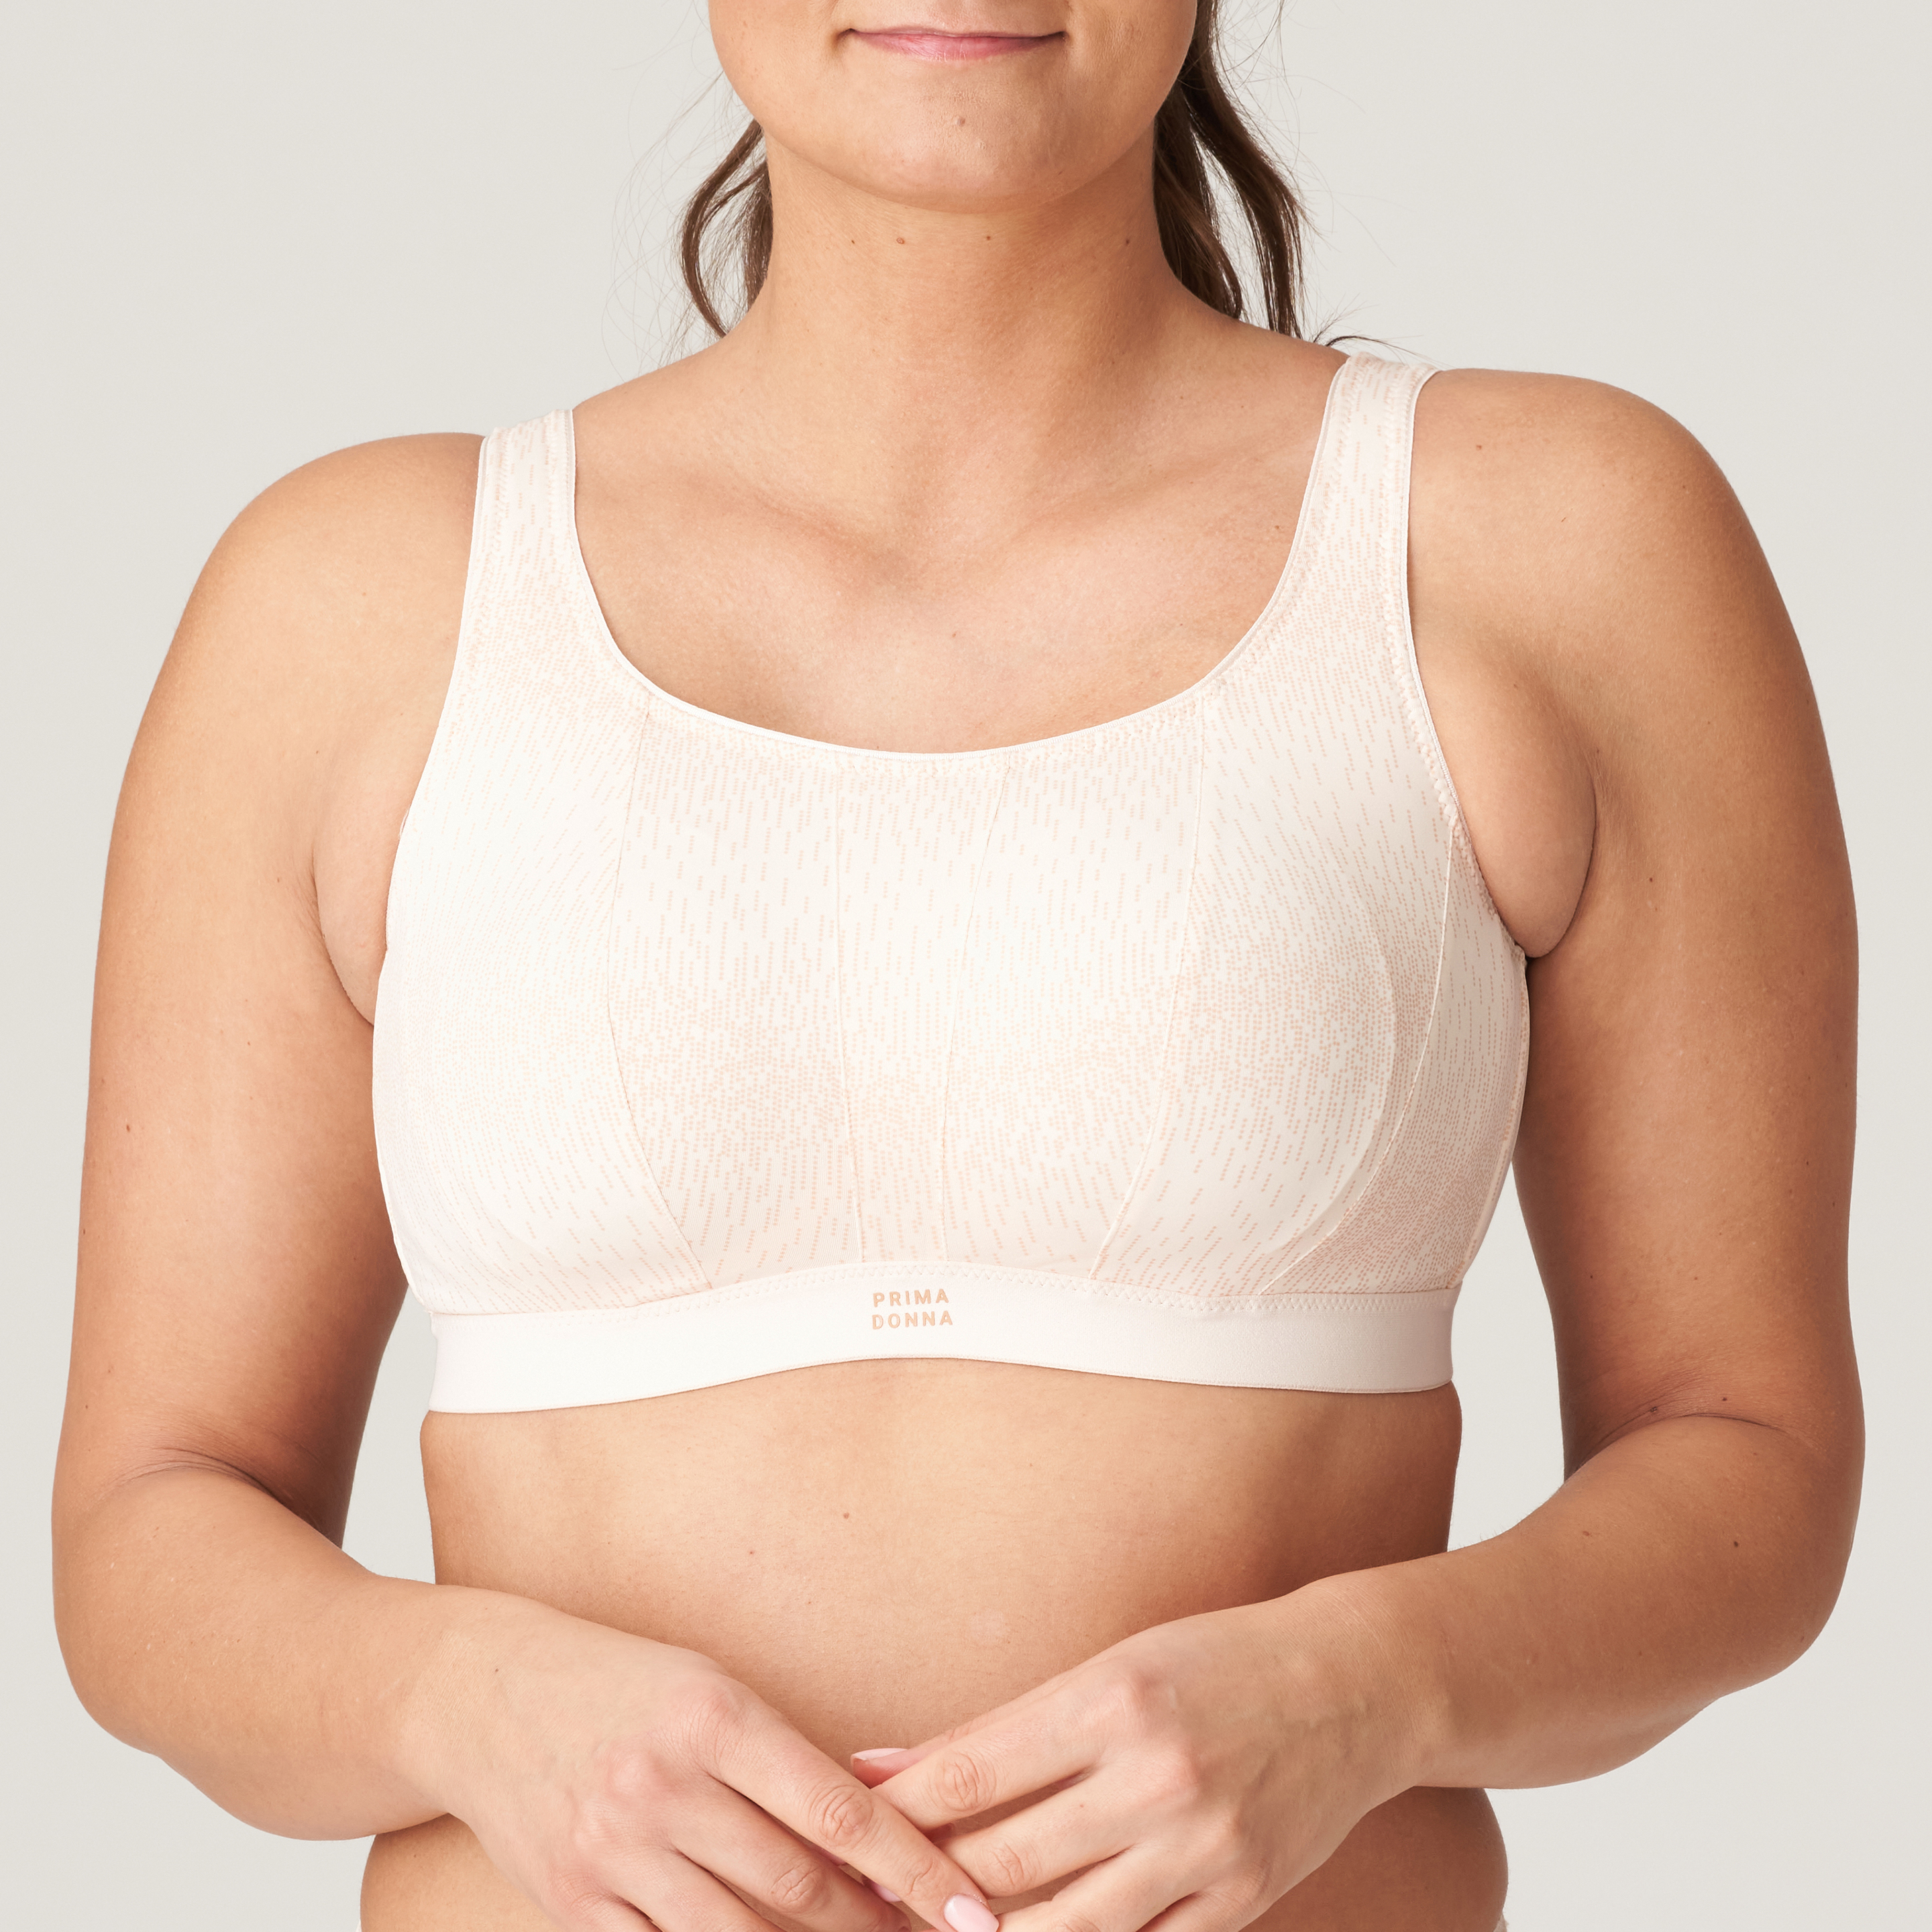 Sexy V Neck Prima Donna Sports Bra For Women And Teen Girls Contrast Color Spaghetti  Strap, Push Up Padded, Wirefree, Ideal For Running, Yoga And Underwear From  Douqidl, $27.72